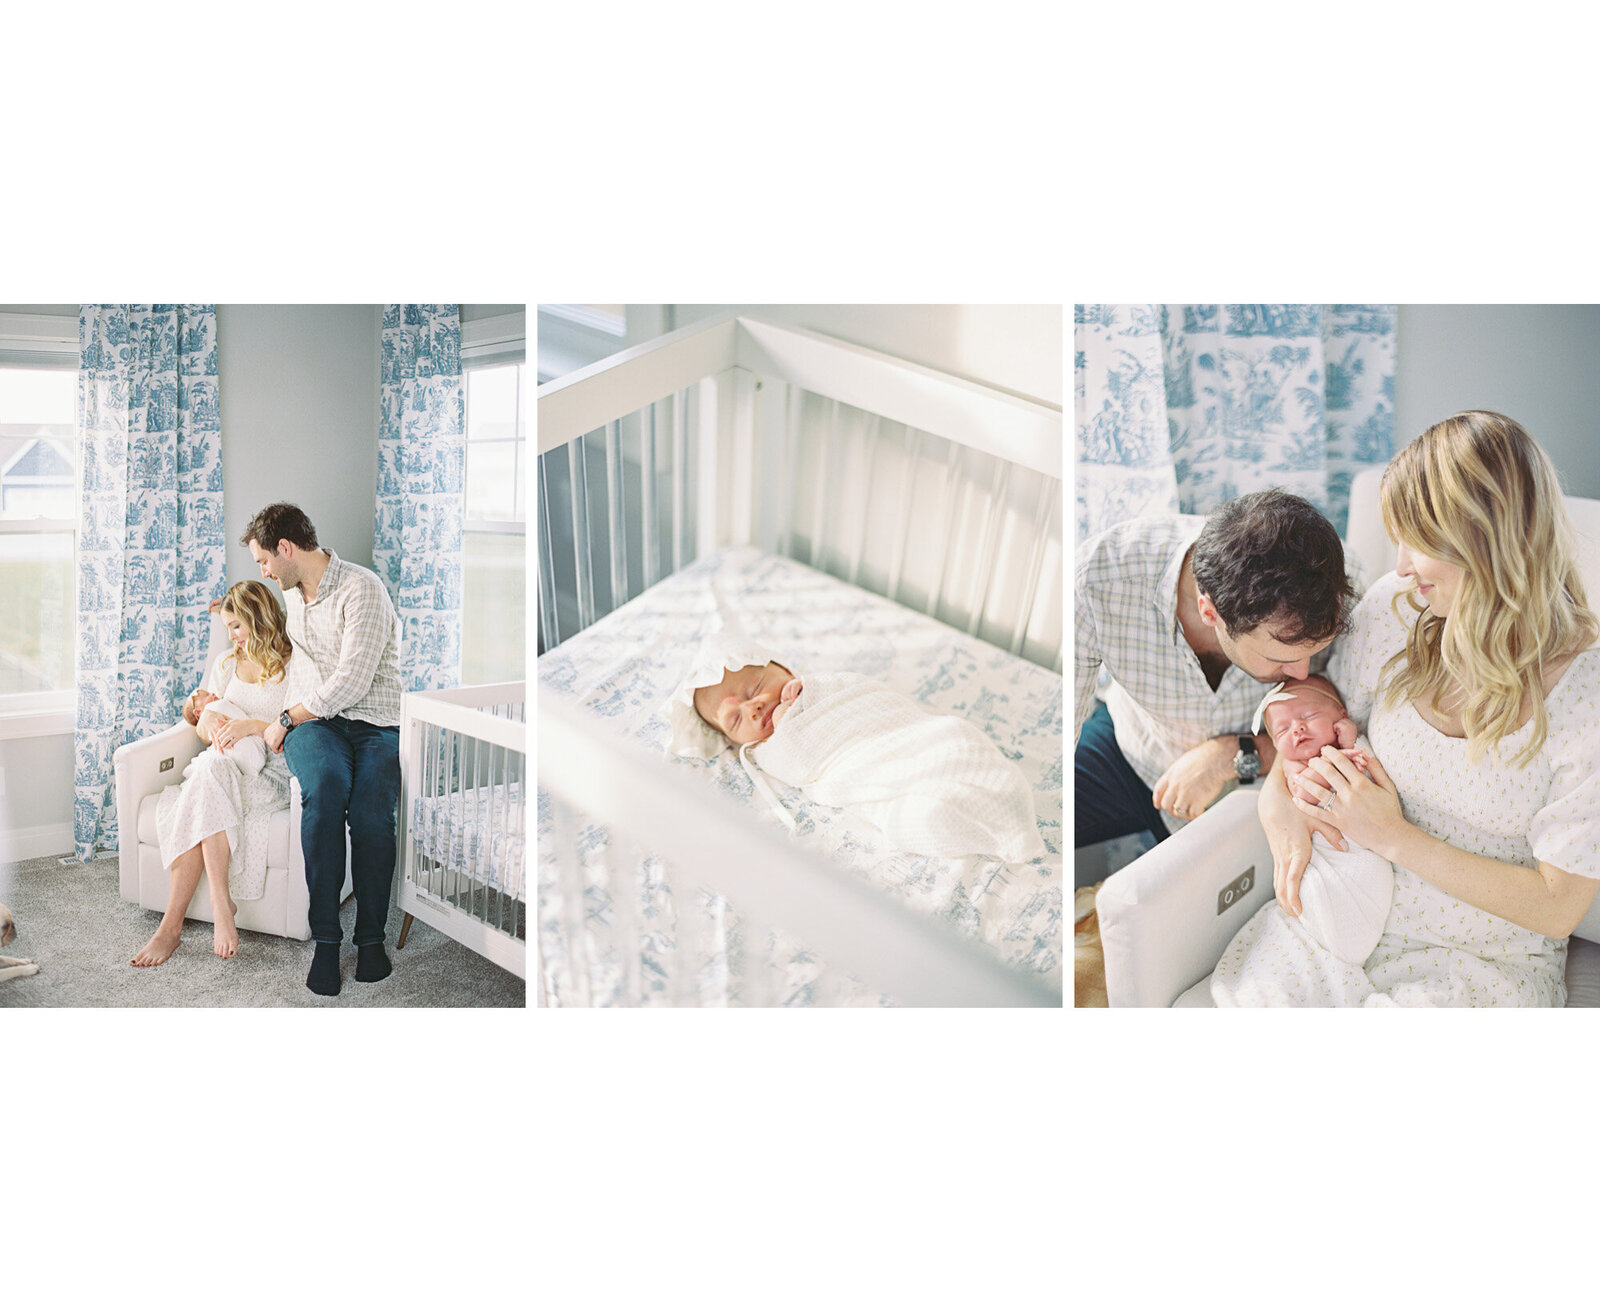 newborn baby held by mom and dad in bright nursery with dusty blue accents by madison wi newborn photographer, Talia Laird Photography